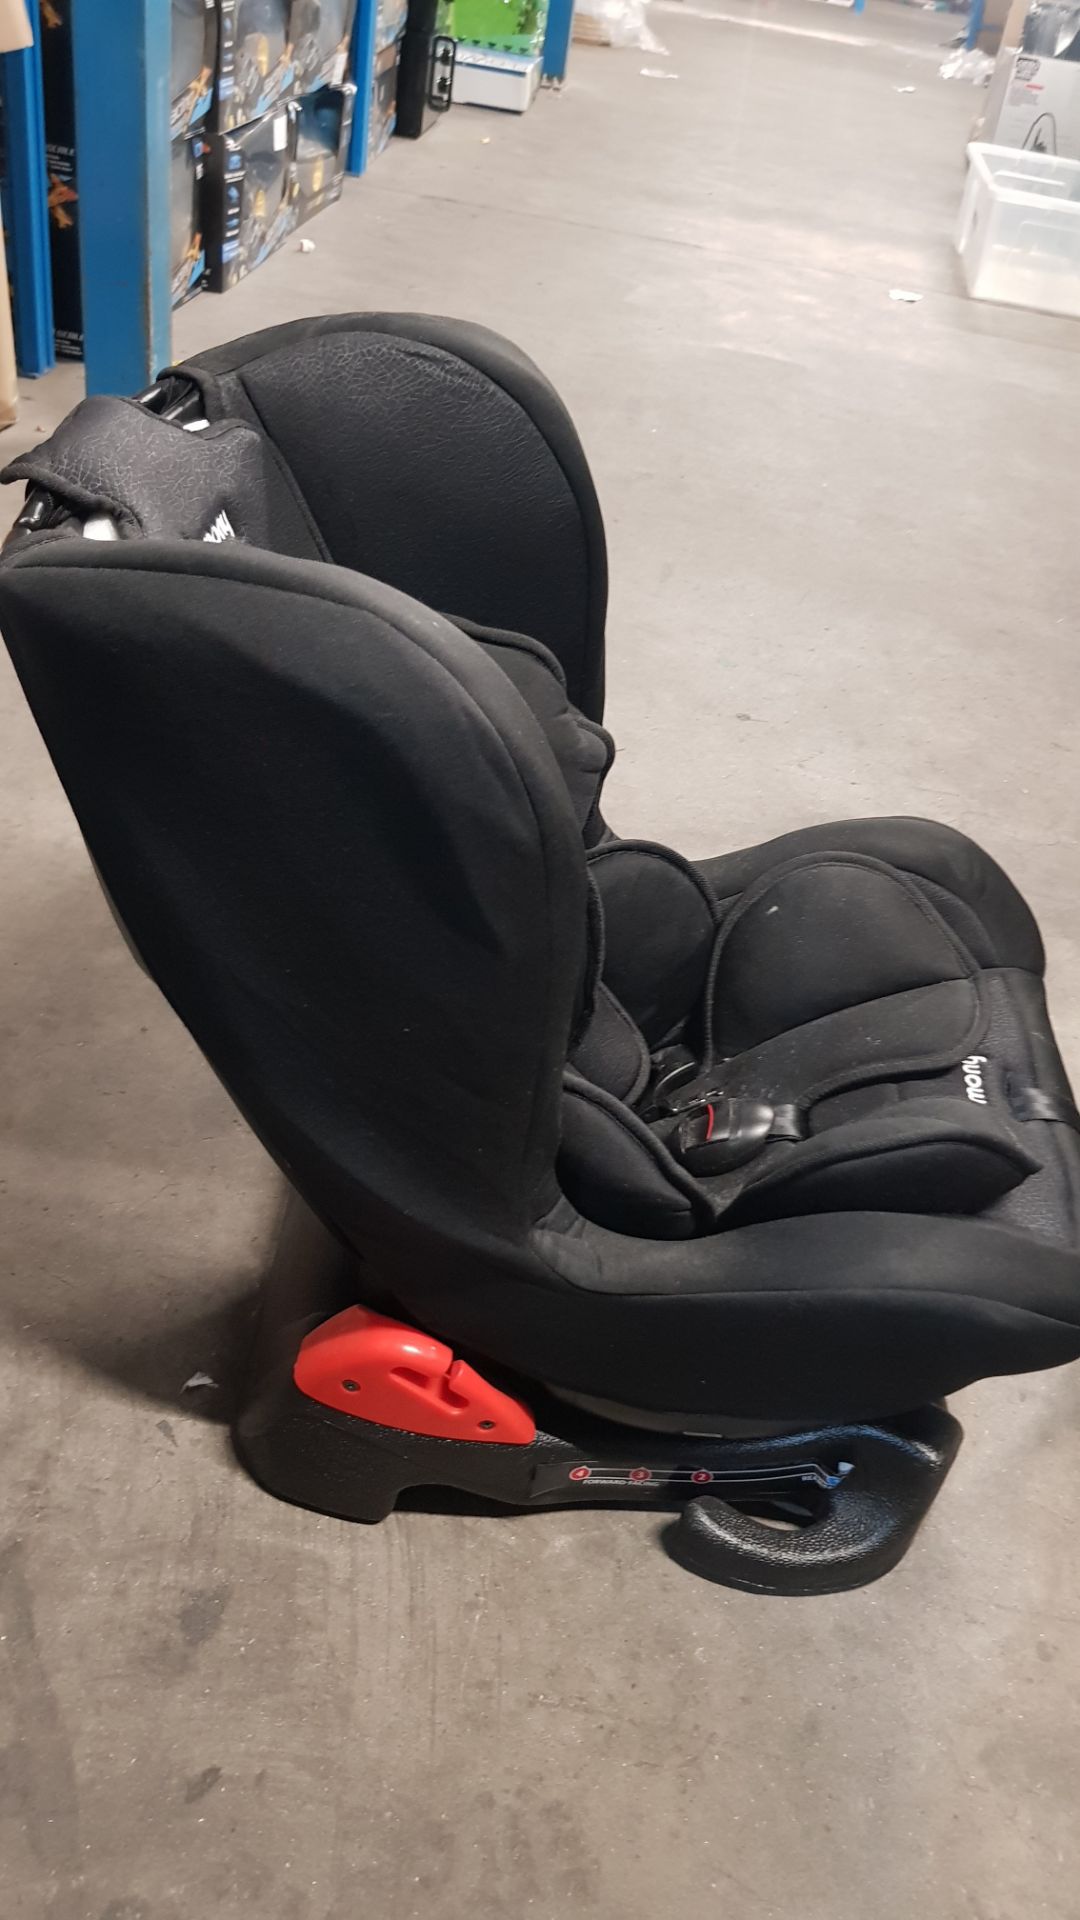 Description: (7/6J) 2x Harmony Car Seats To Include 1x Venture Deluxe Harnessed Booster Seat Forward - Image 8 of 9